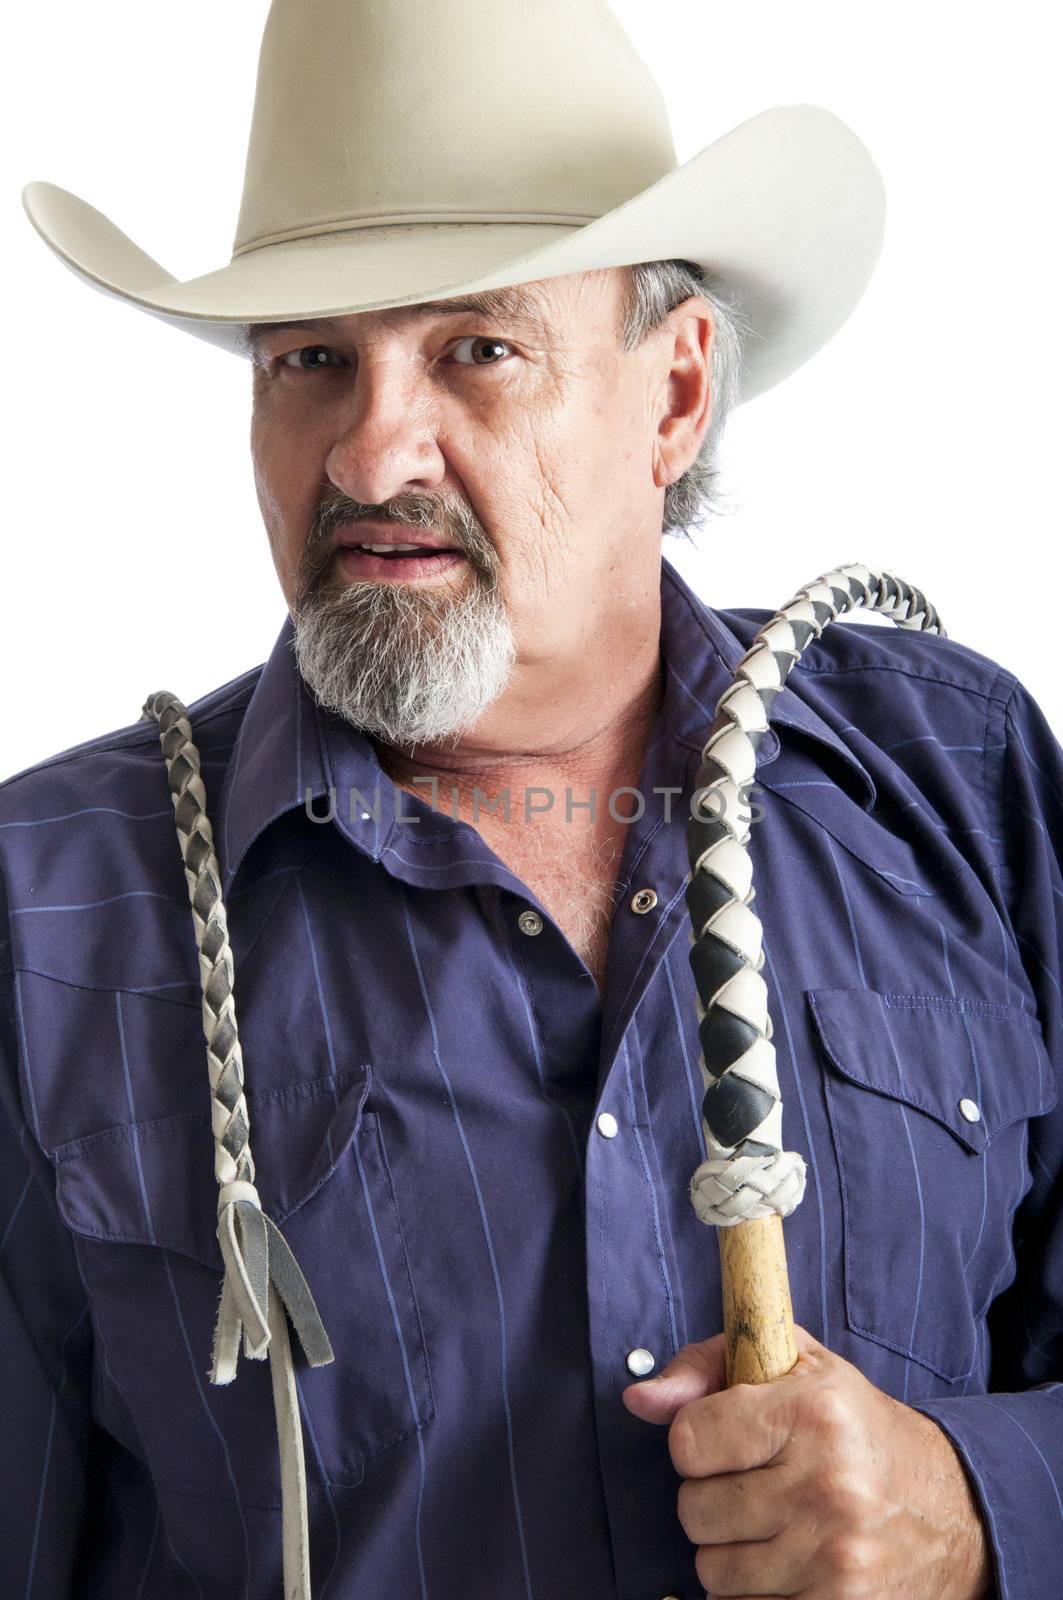 Cowboy holding a bullwhip around his shoulder. Isolated on white